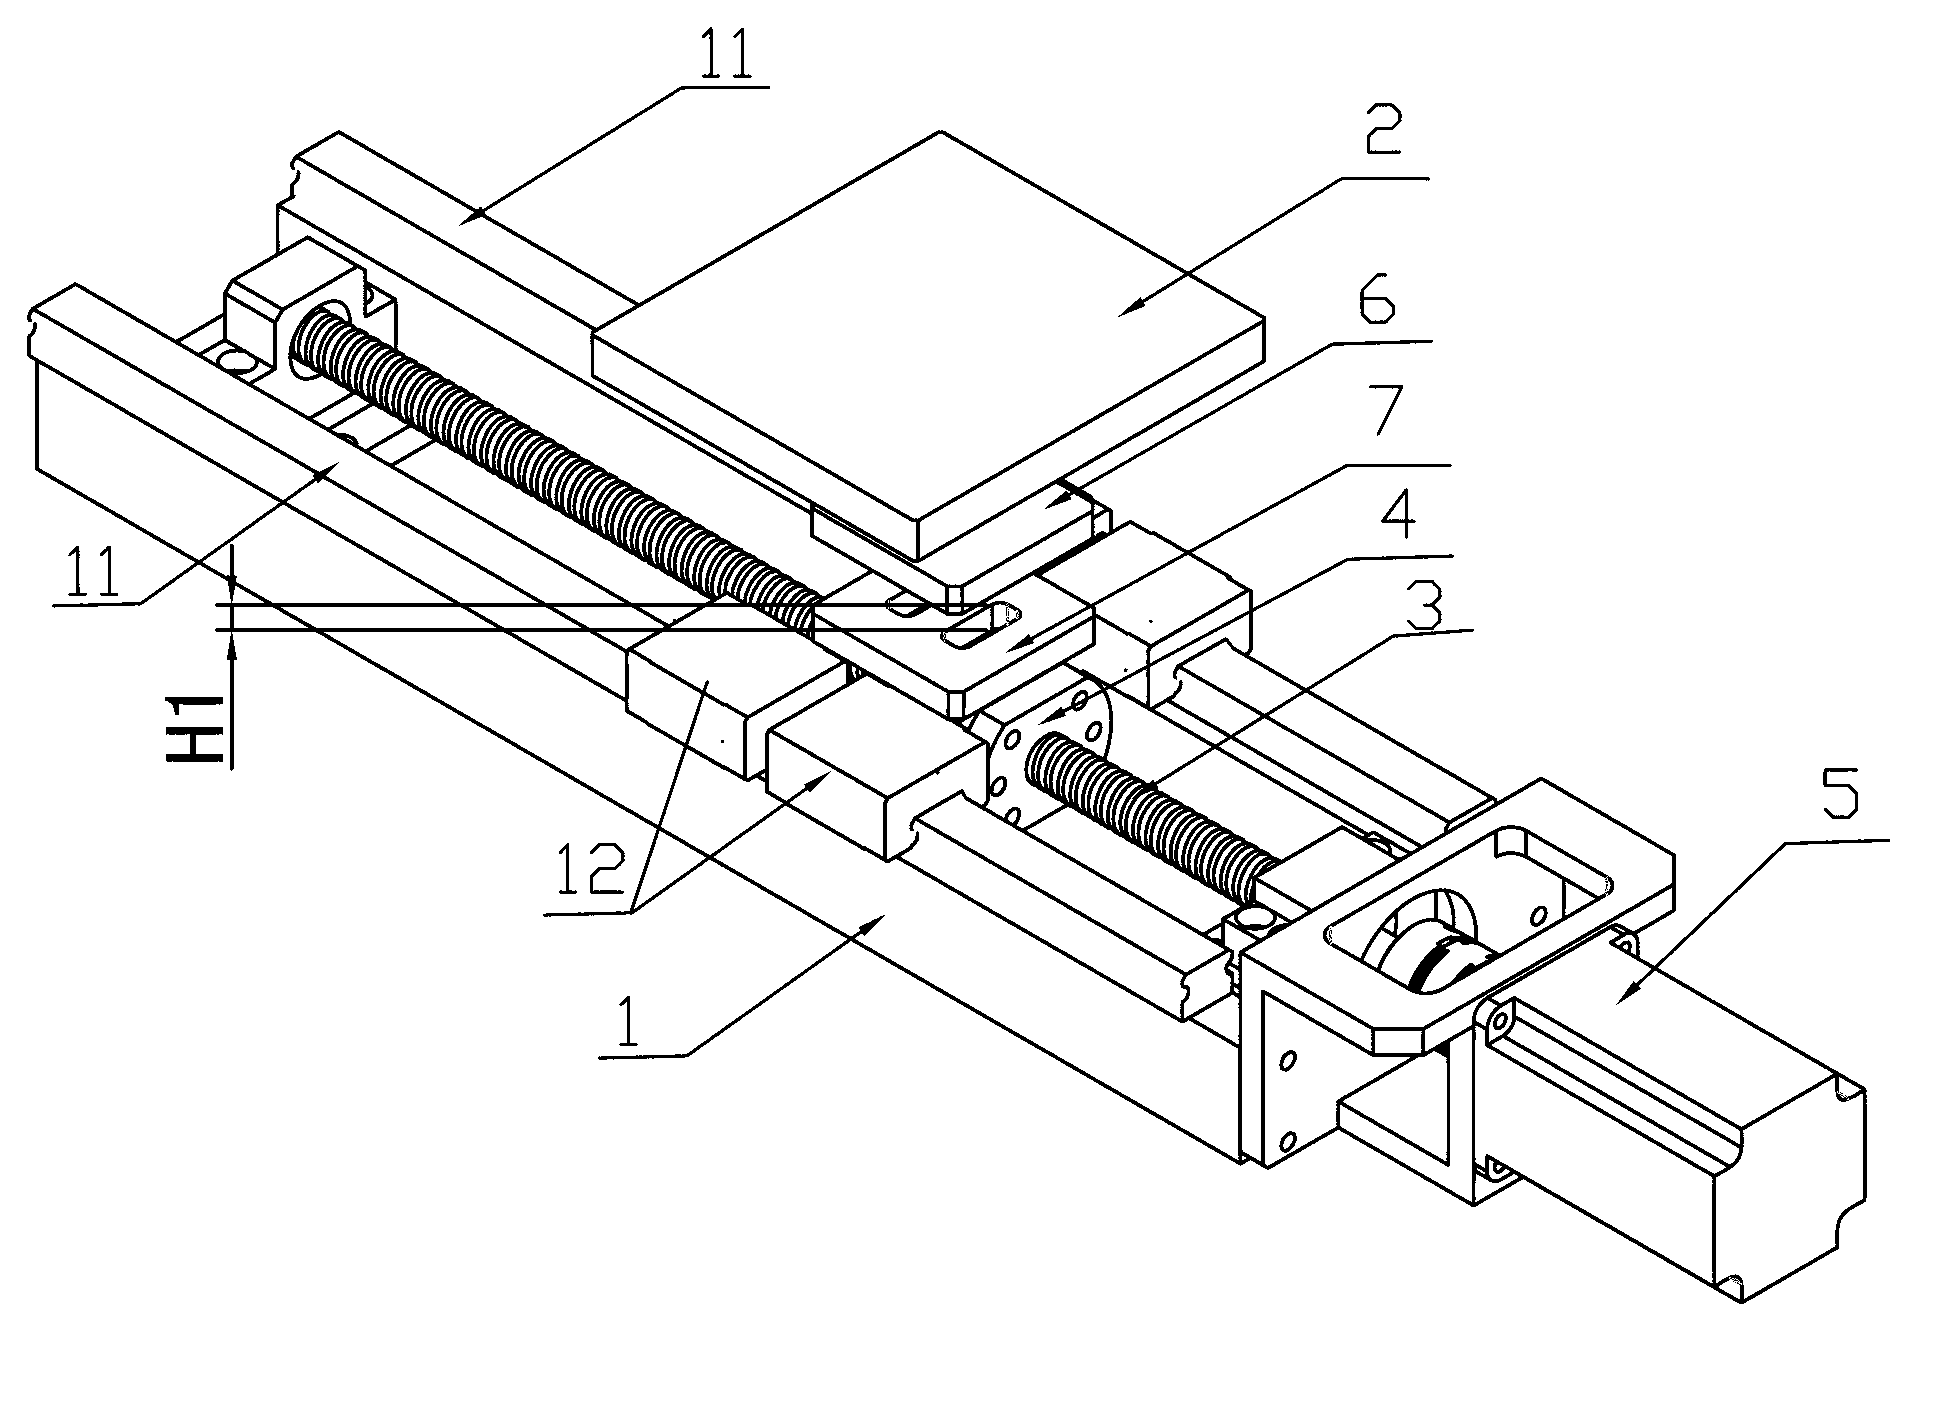 Linear moving device